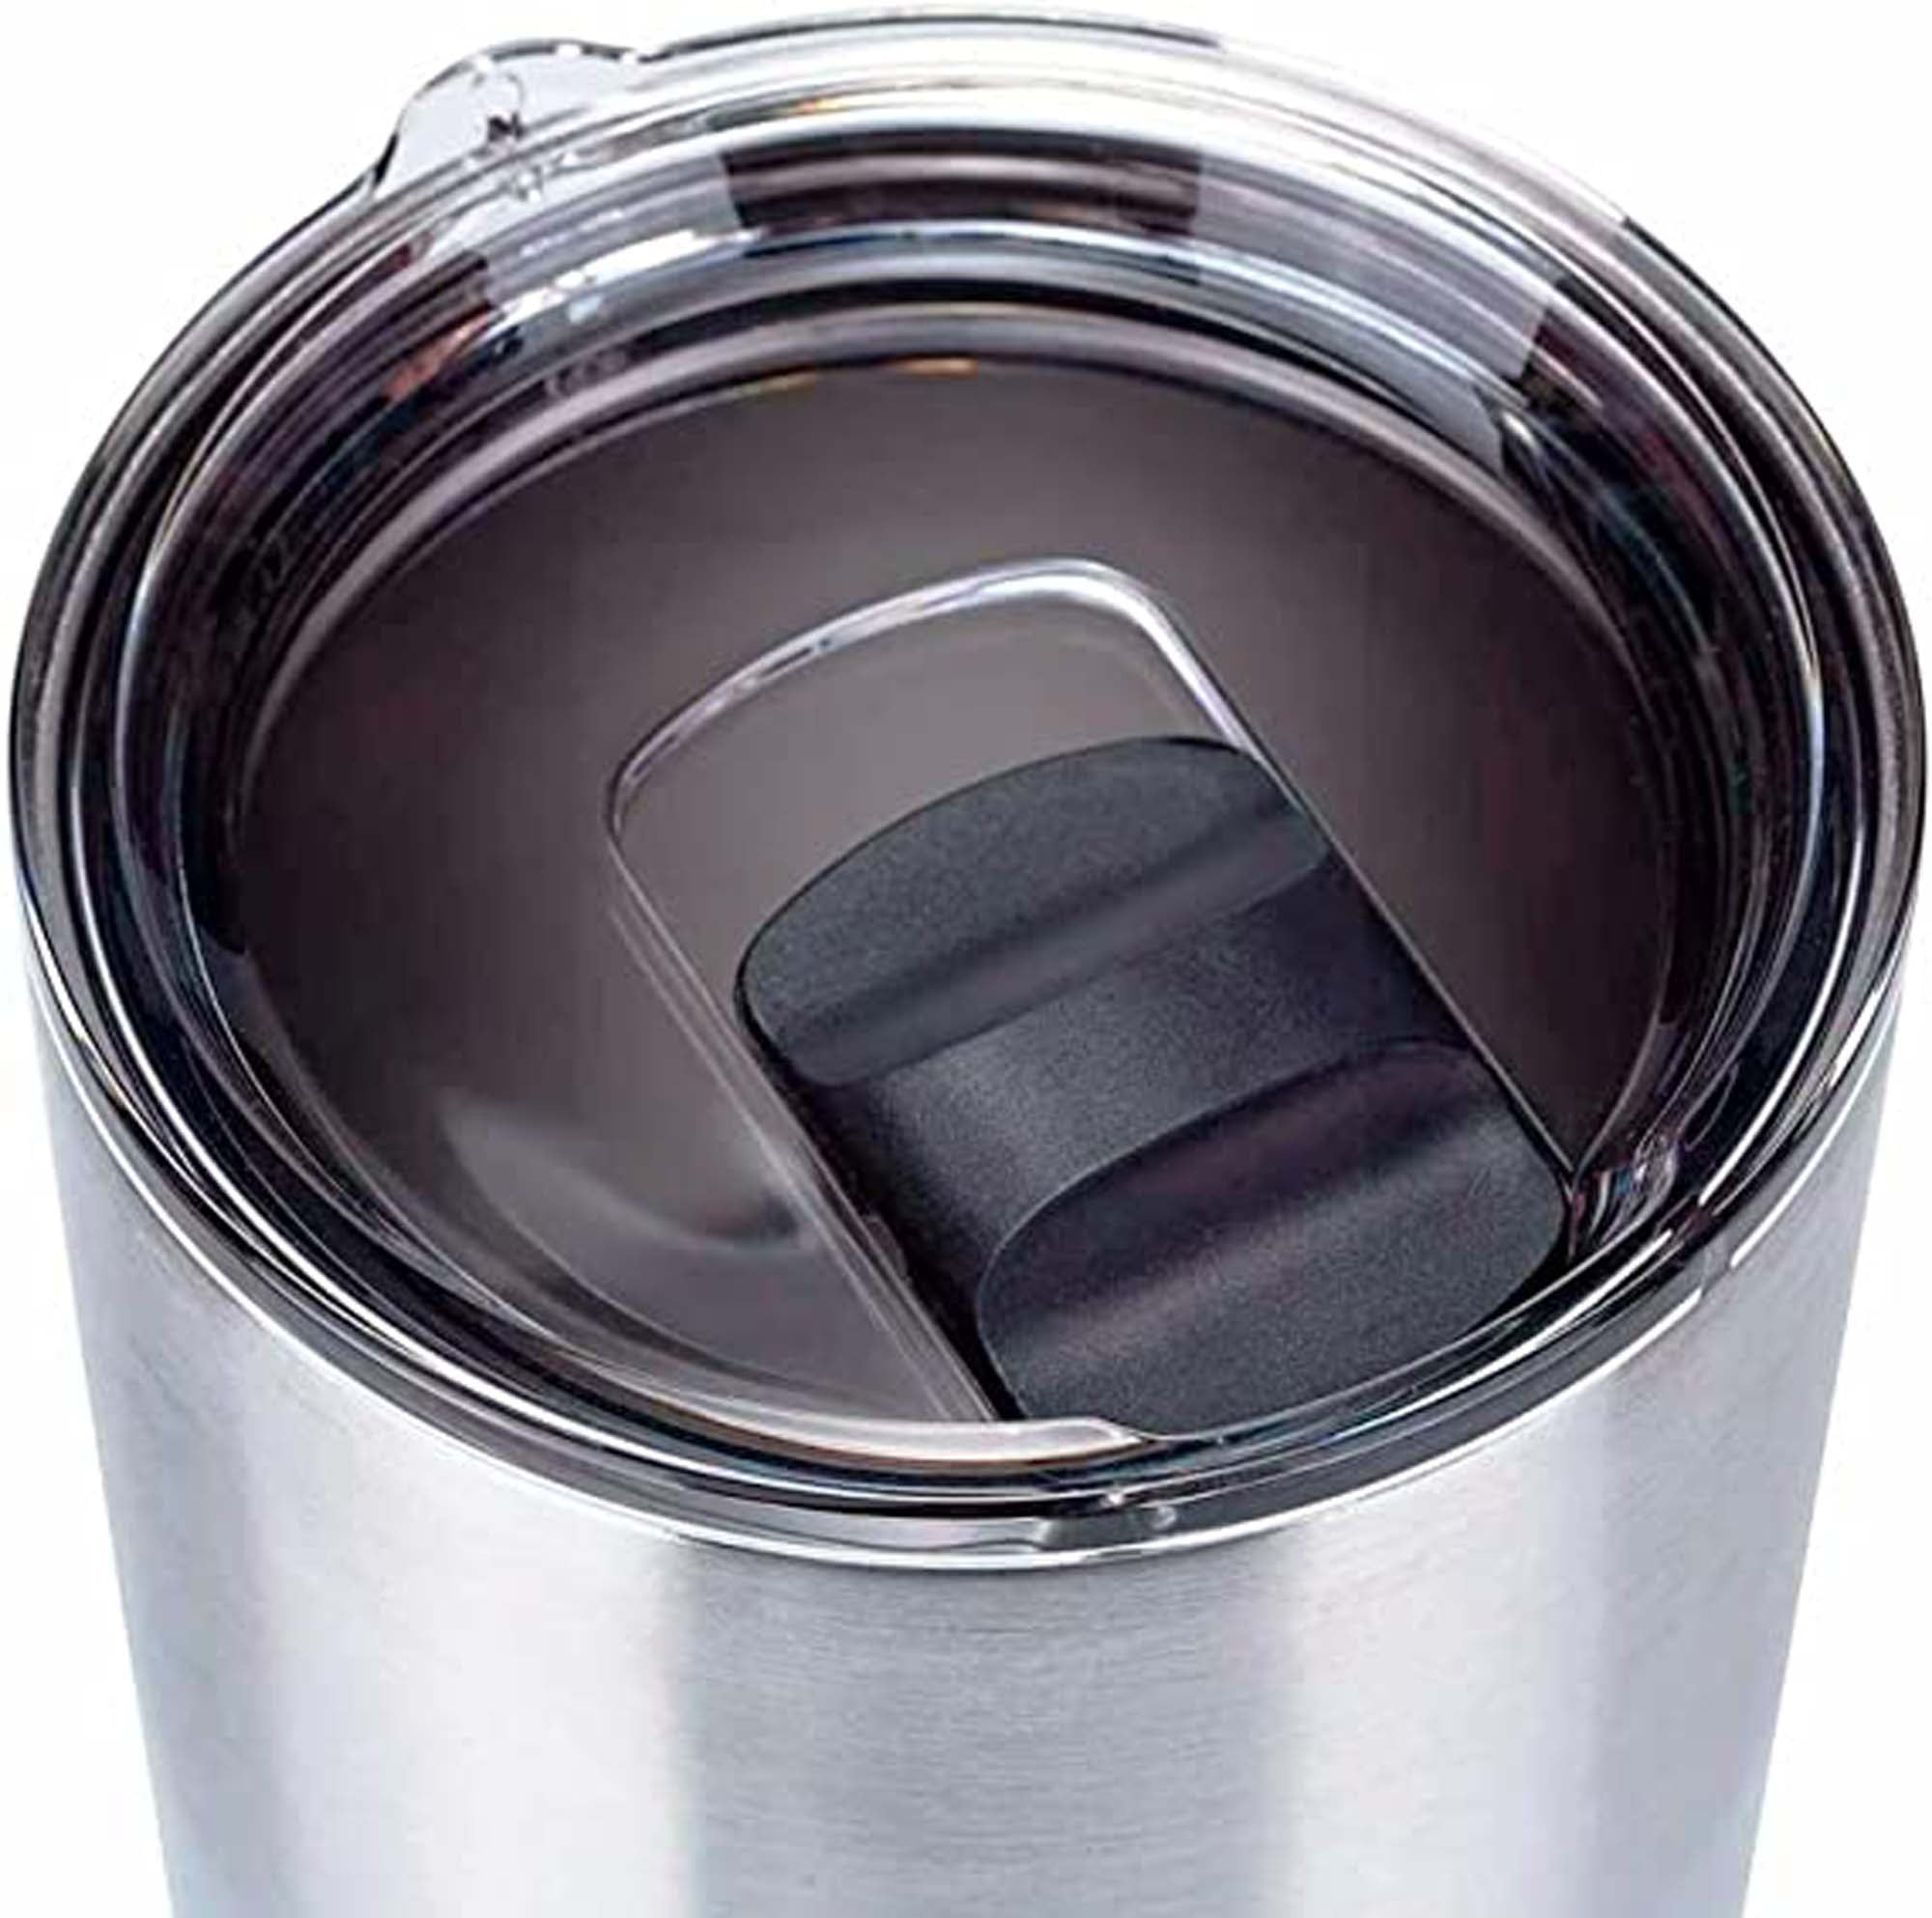 Doolland Magnetic Tumbler Lid, Fits Yeti Rambler or Old Style RTIC